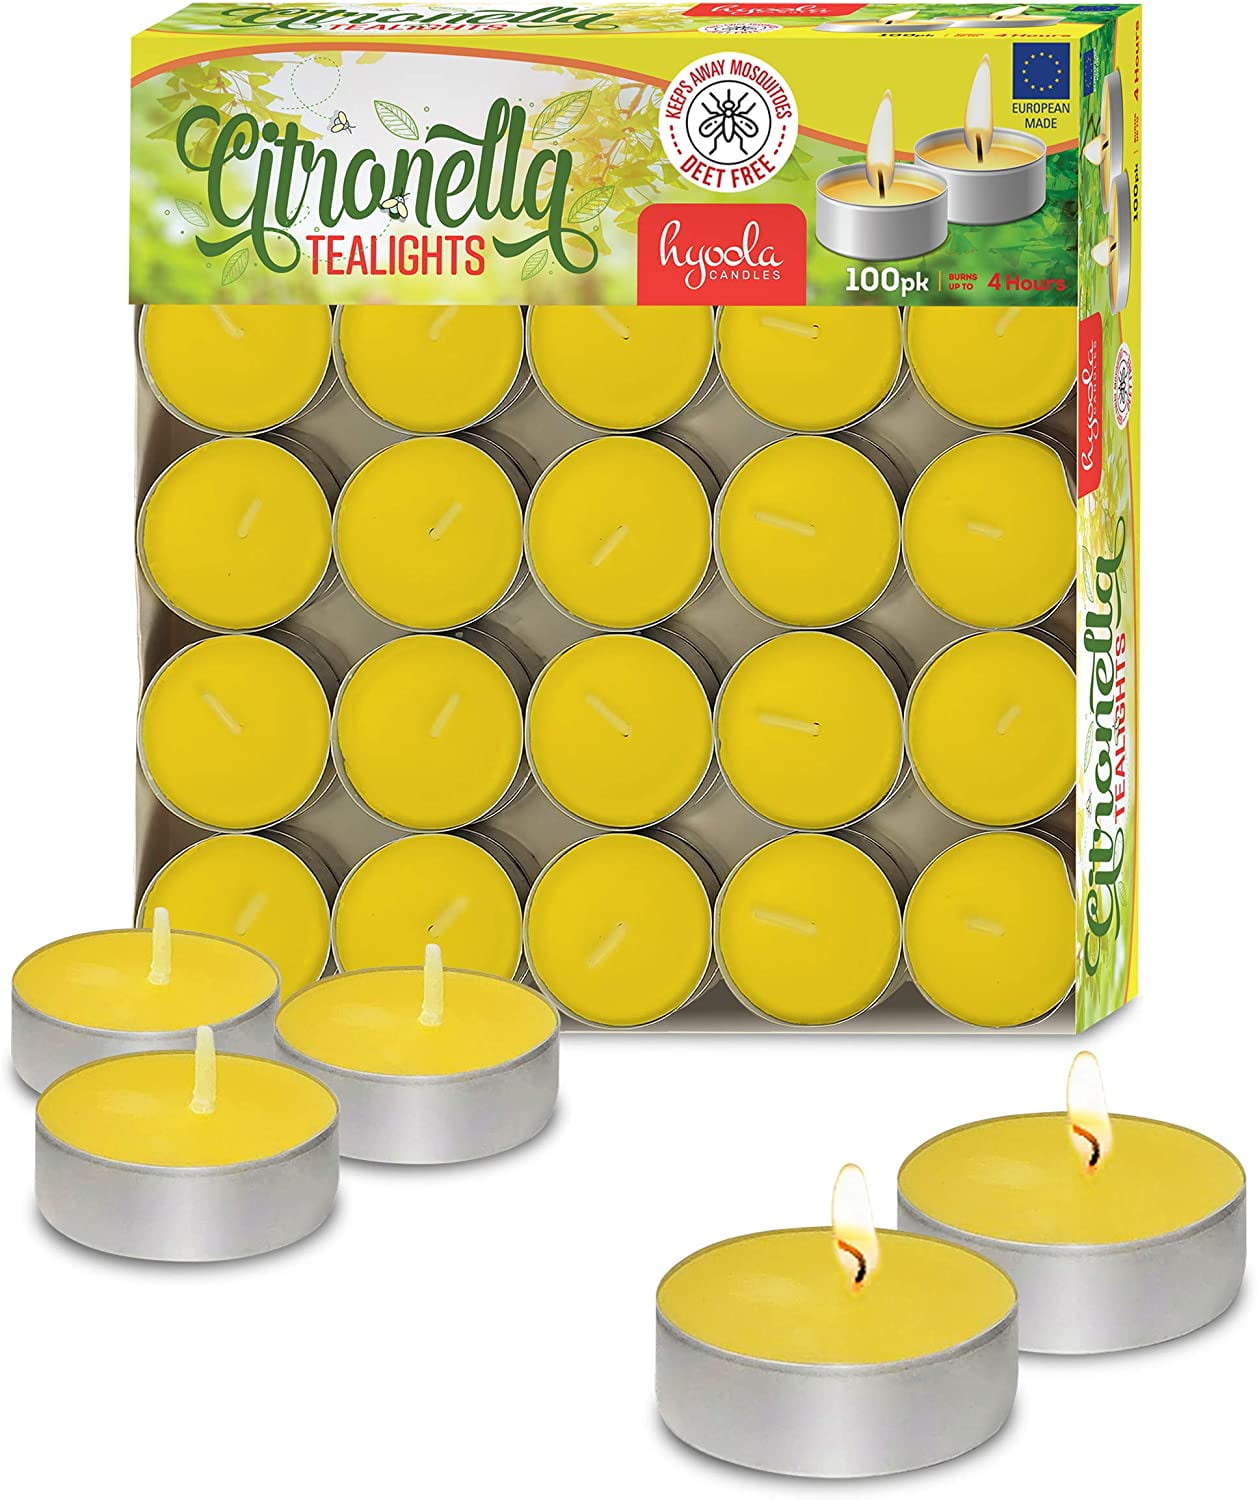 Citronella Tealight Candles Mosquito Fly Insect Repeller Tea Lights Fragranced 